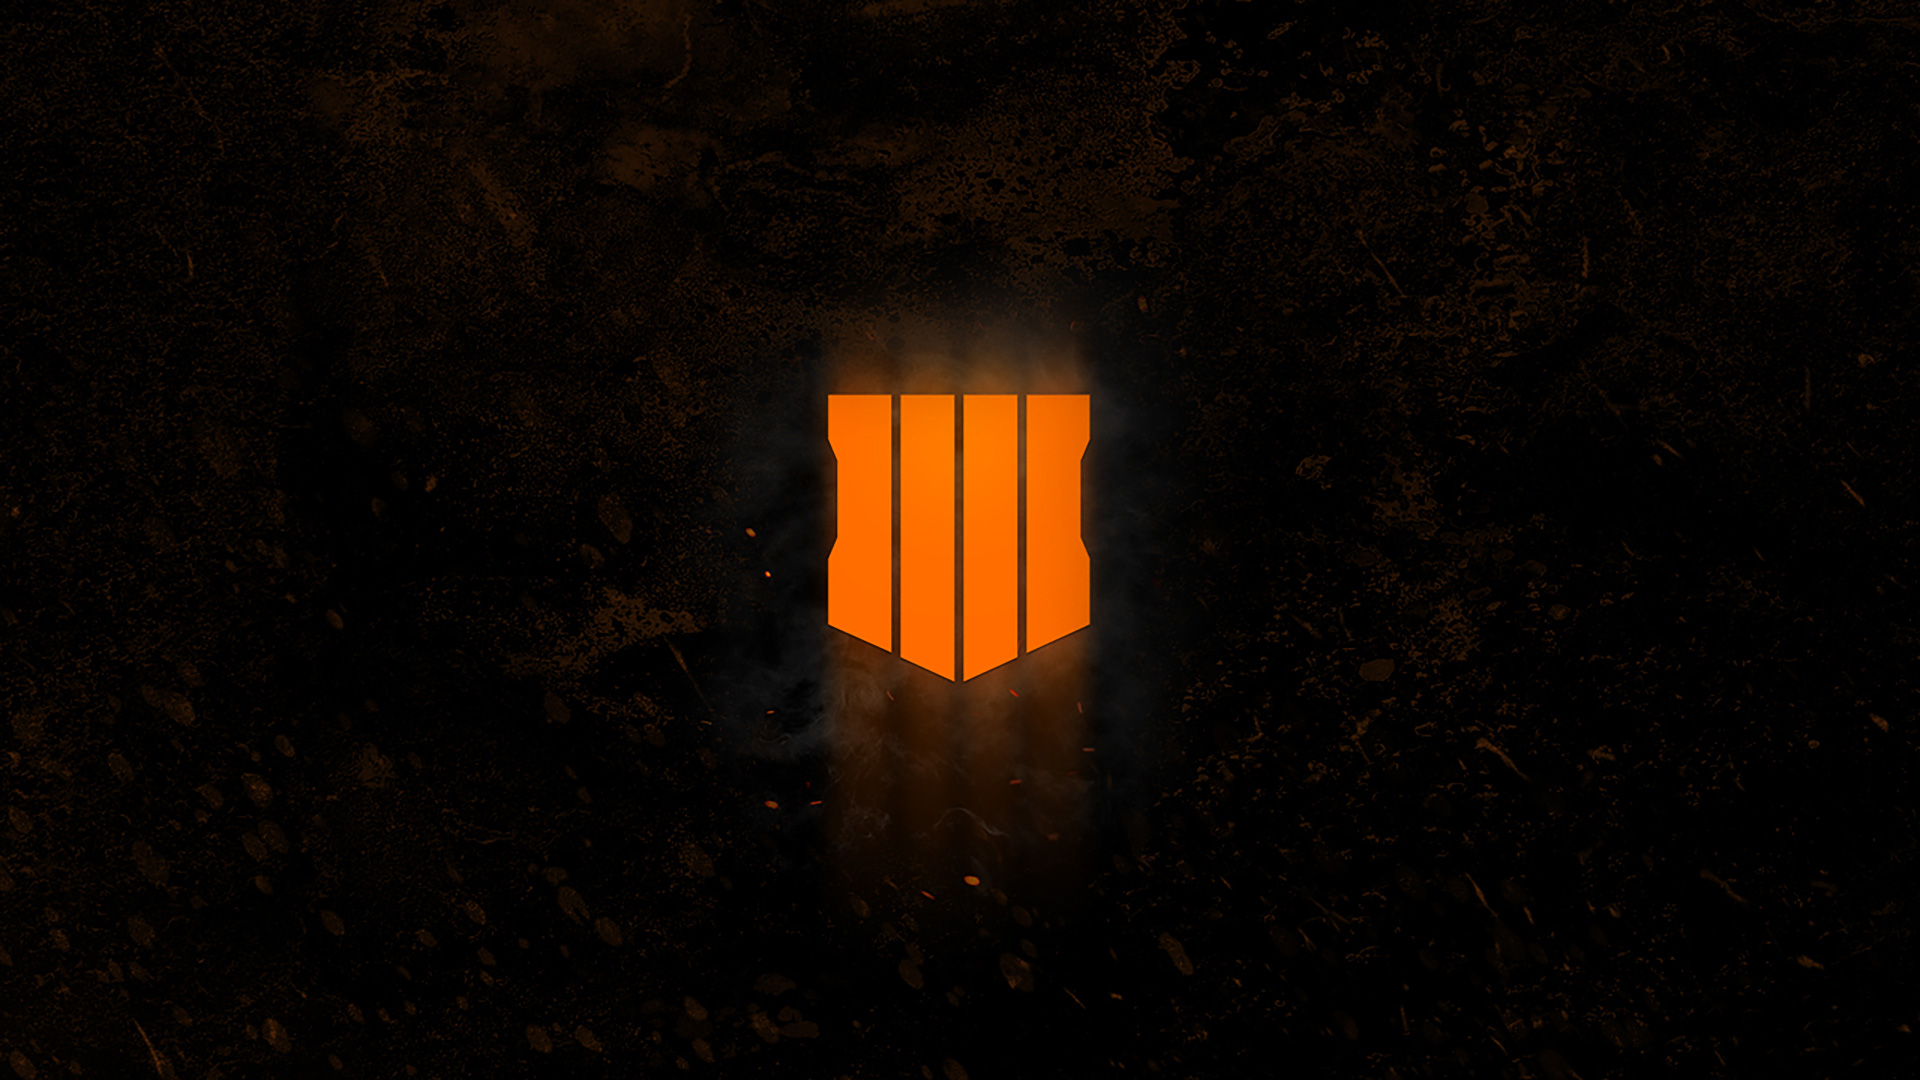 pixel 3 call of duty black ops 4 wallpapers